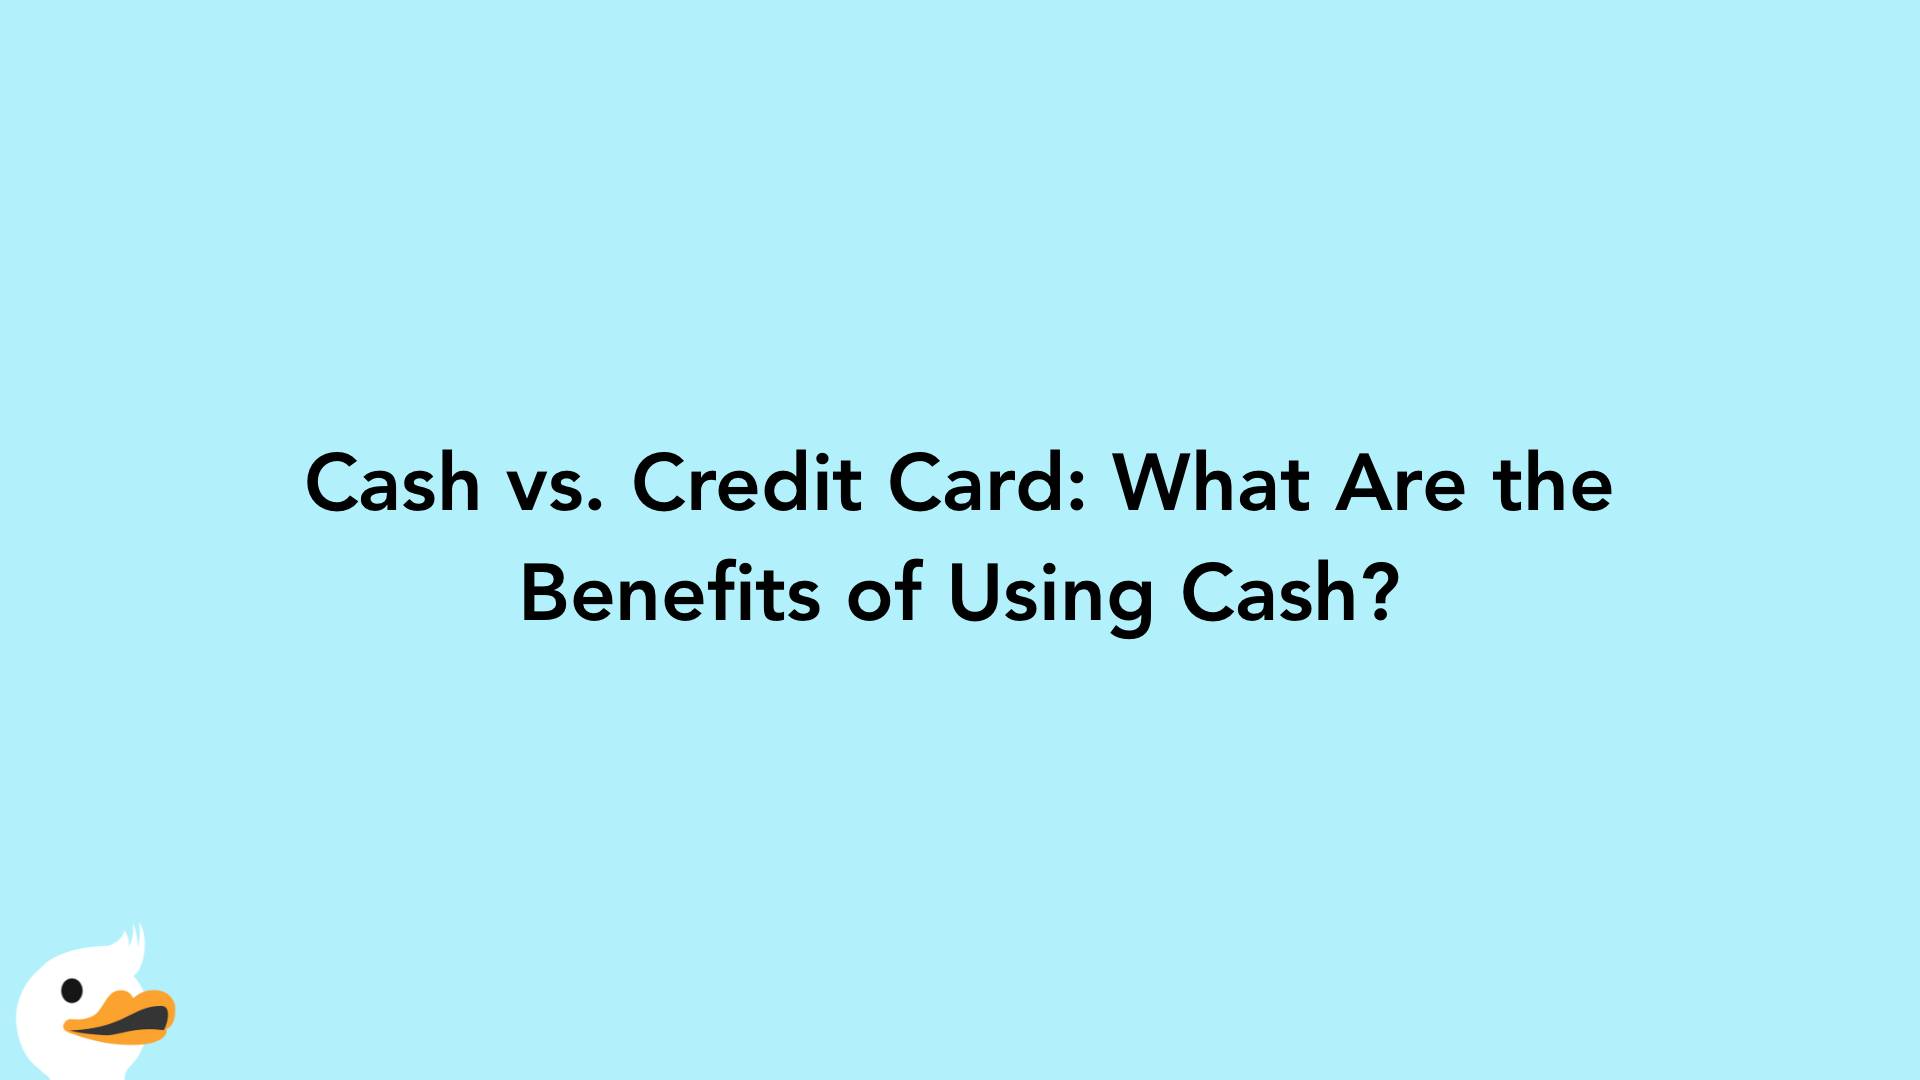 Cash vs. Credit Card: What Are the Benefits of Using Cash?